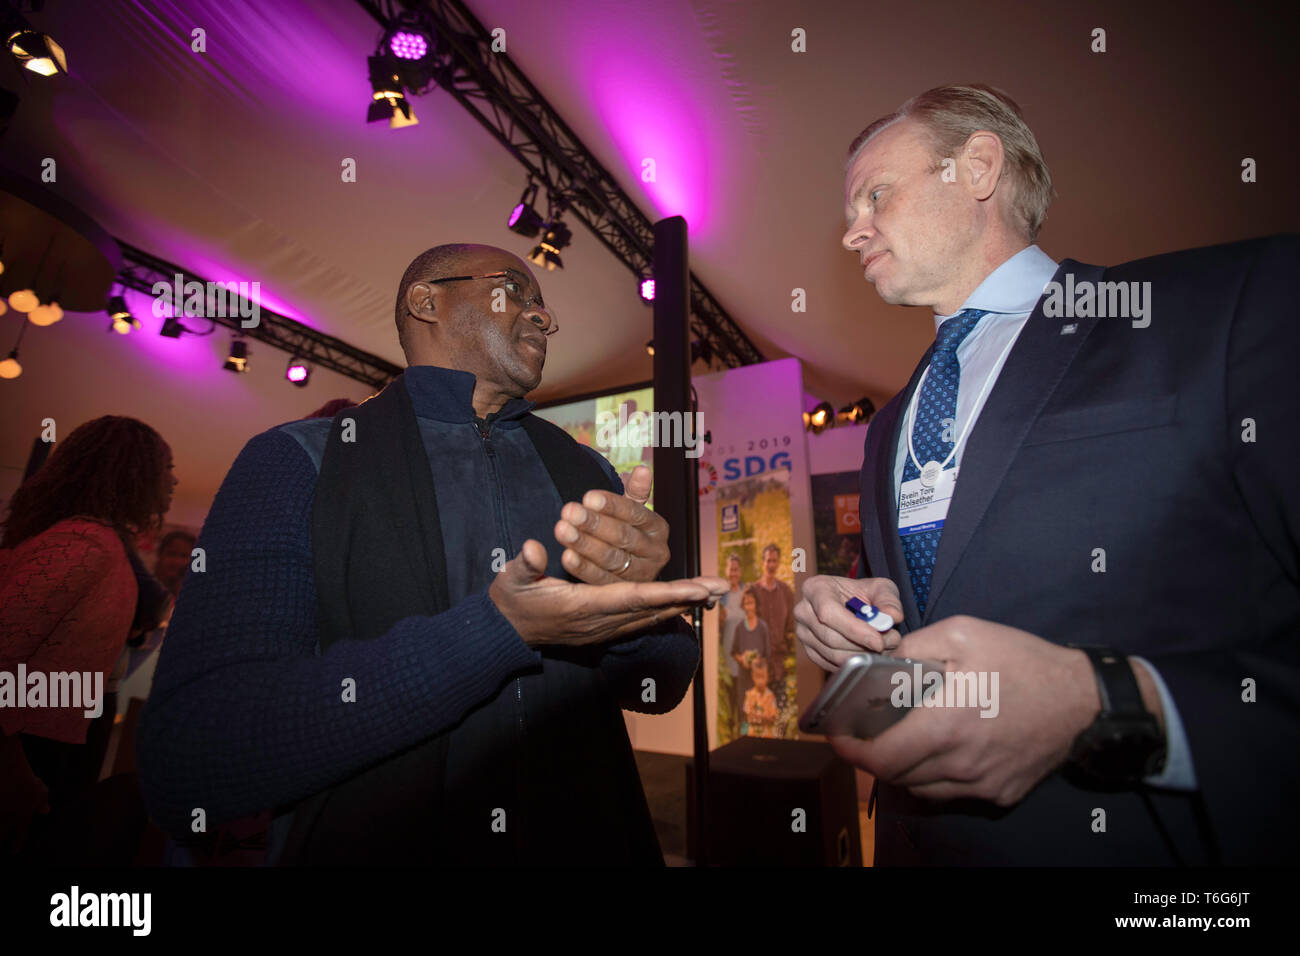 CEO of Yara, Svein Tore Holsether with Econet founder Strive Masiyiwa at the World Economic Forum. Holsether and Yara are introducing a cheap micro sensor that reads the nitrogen values in crops, making it possible to tailor the use of fertilizer to optimize growth. Econet could possibly be a partner by distributing the sensor to customers who are in the farming business. Stock Photo